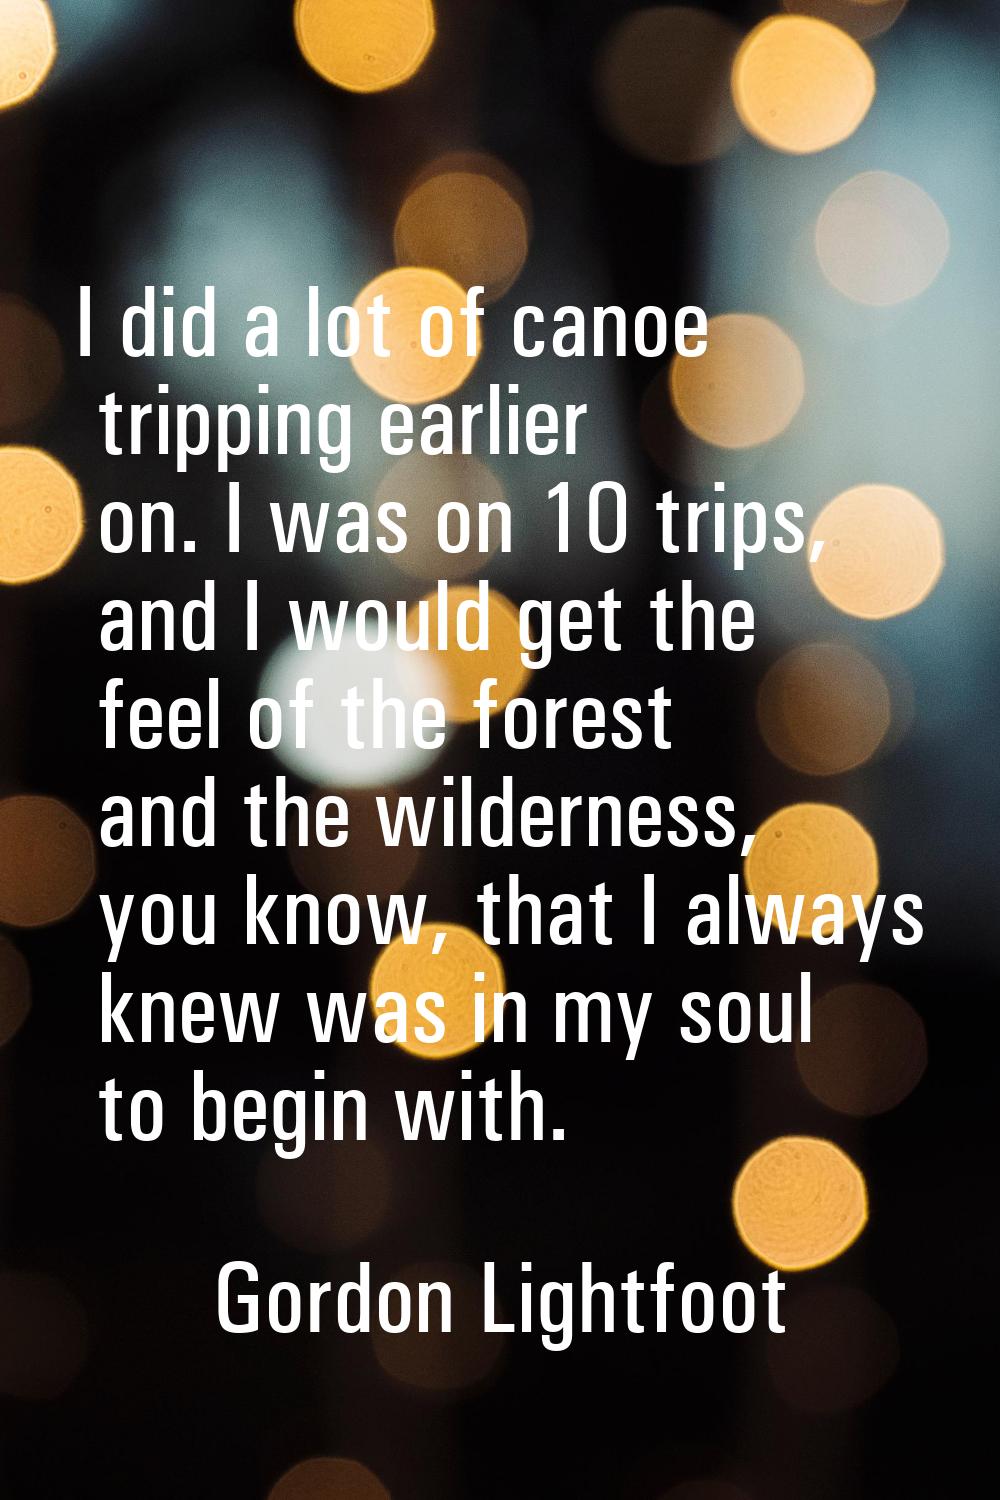 I did a lot of canoe tripping earlier on. I was on 10 trips, and I would get the feel of the forest